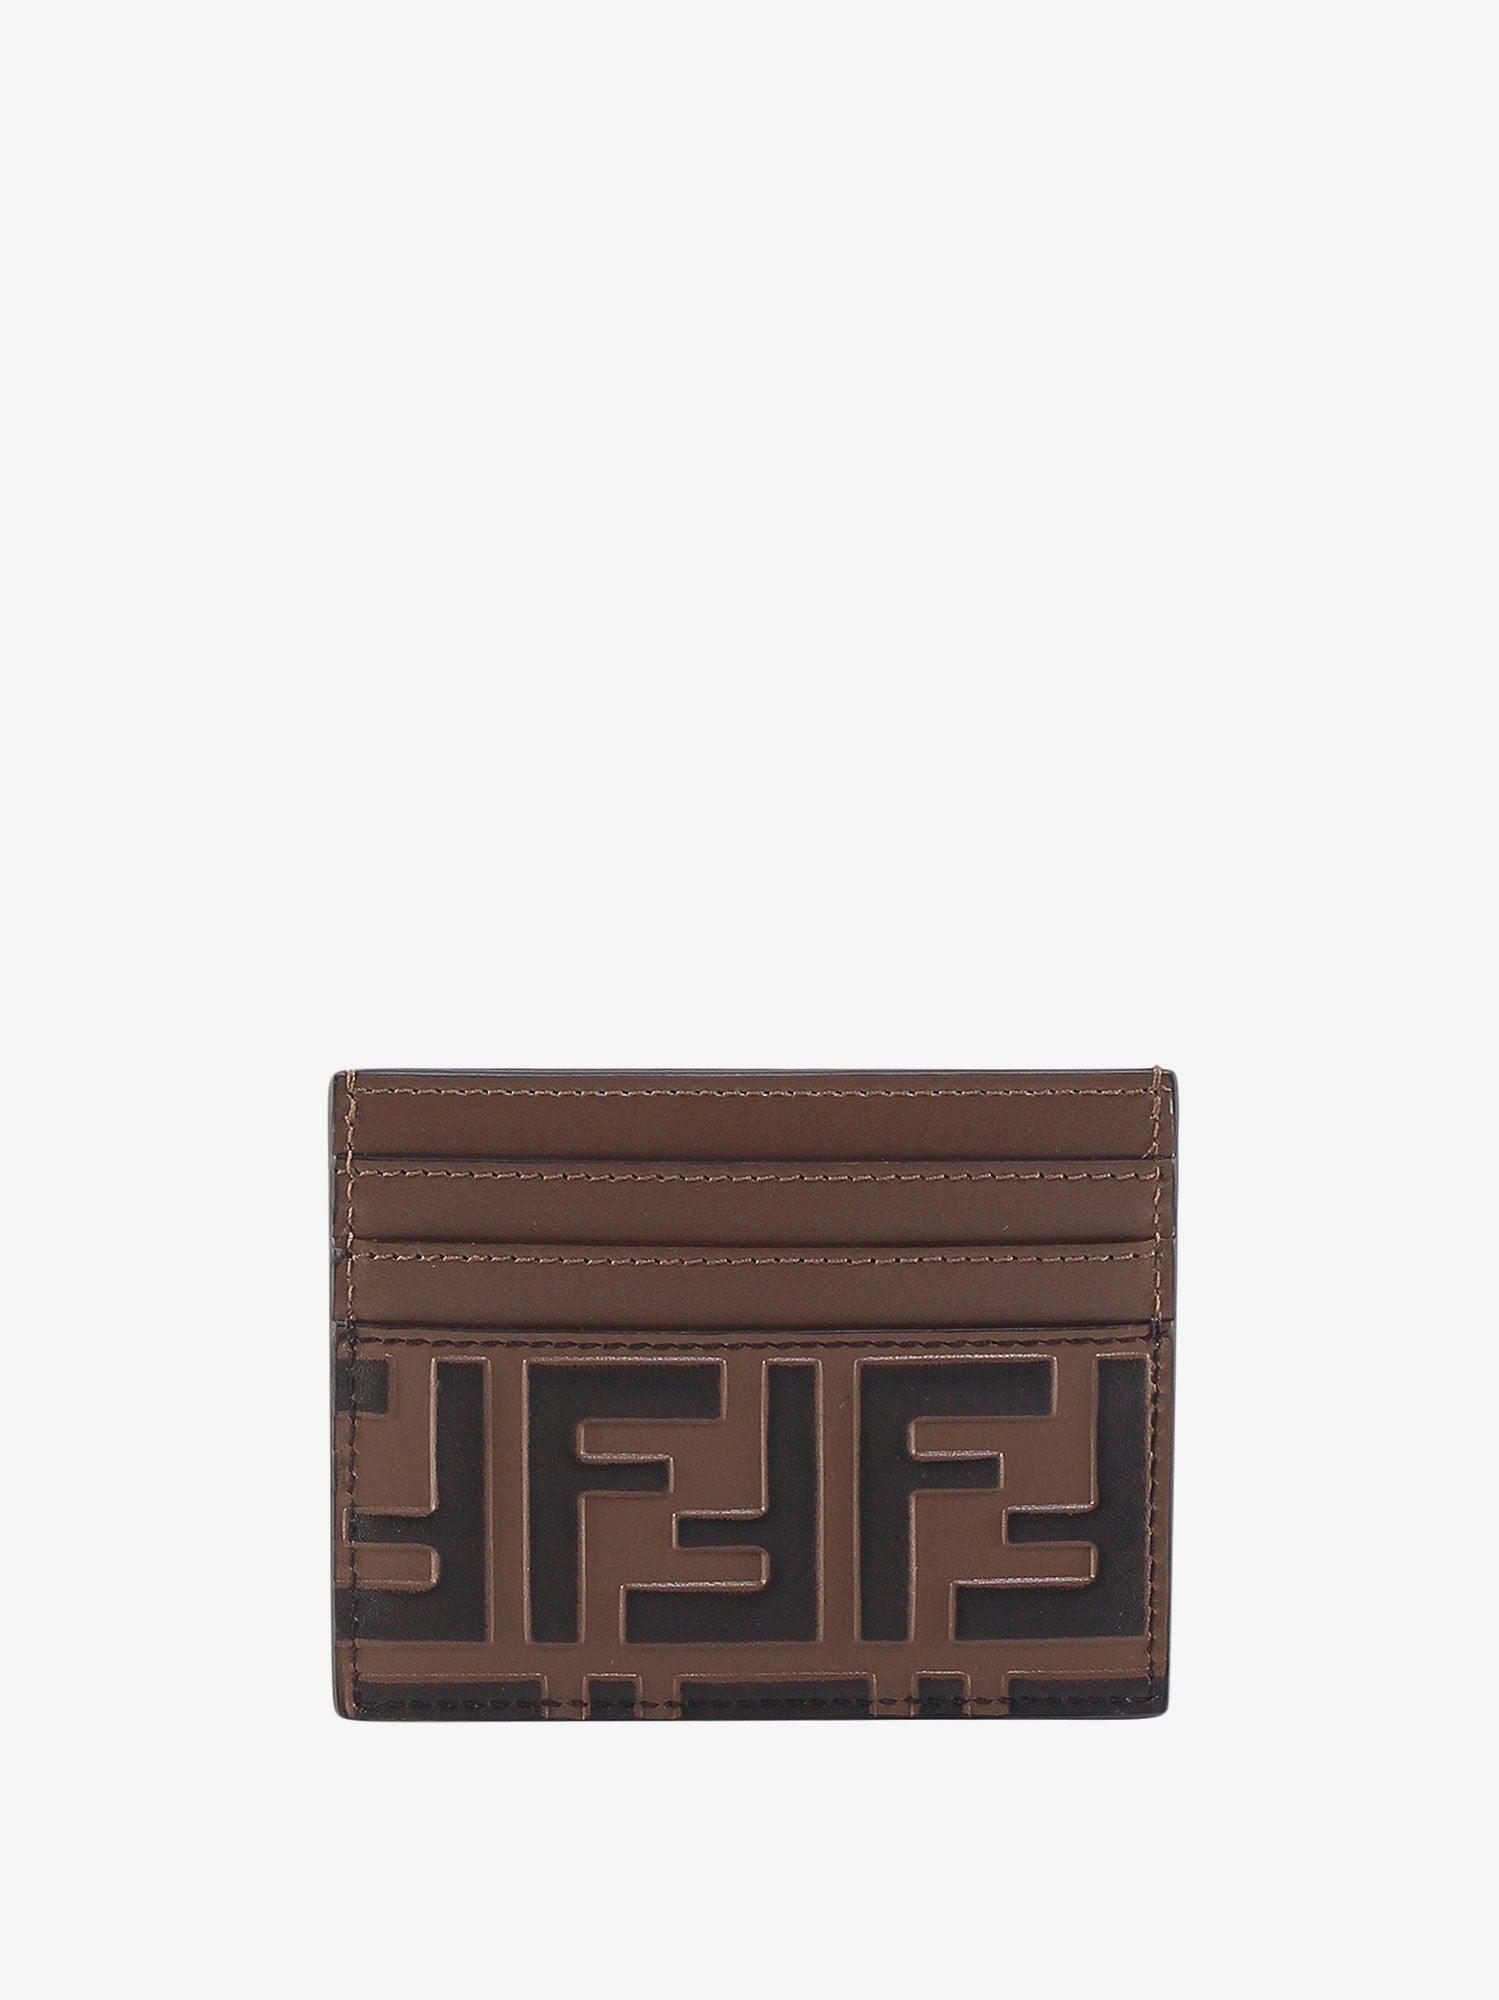 Fendi Ff Leather Card Holder in Brown